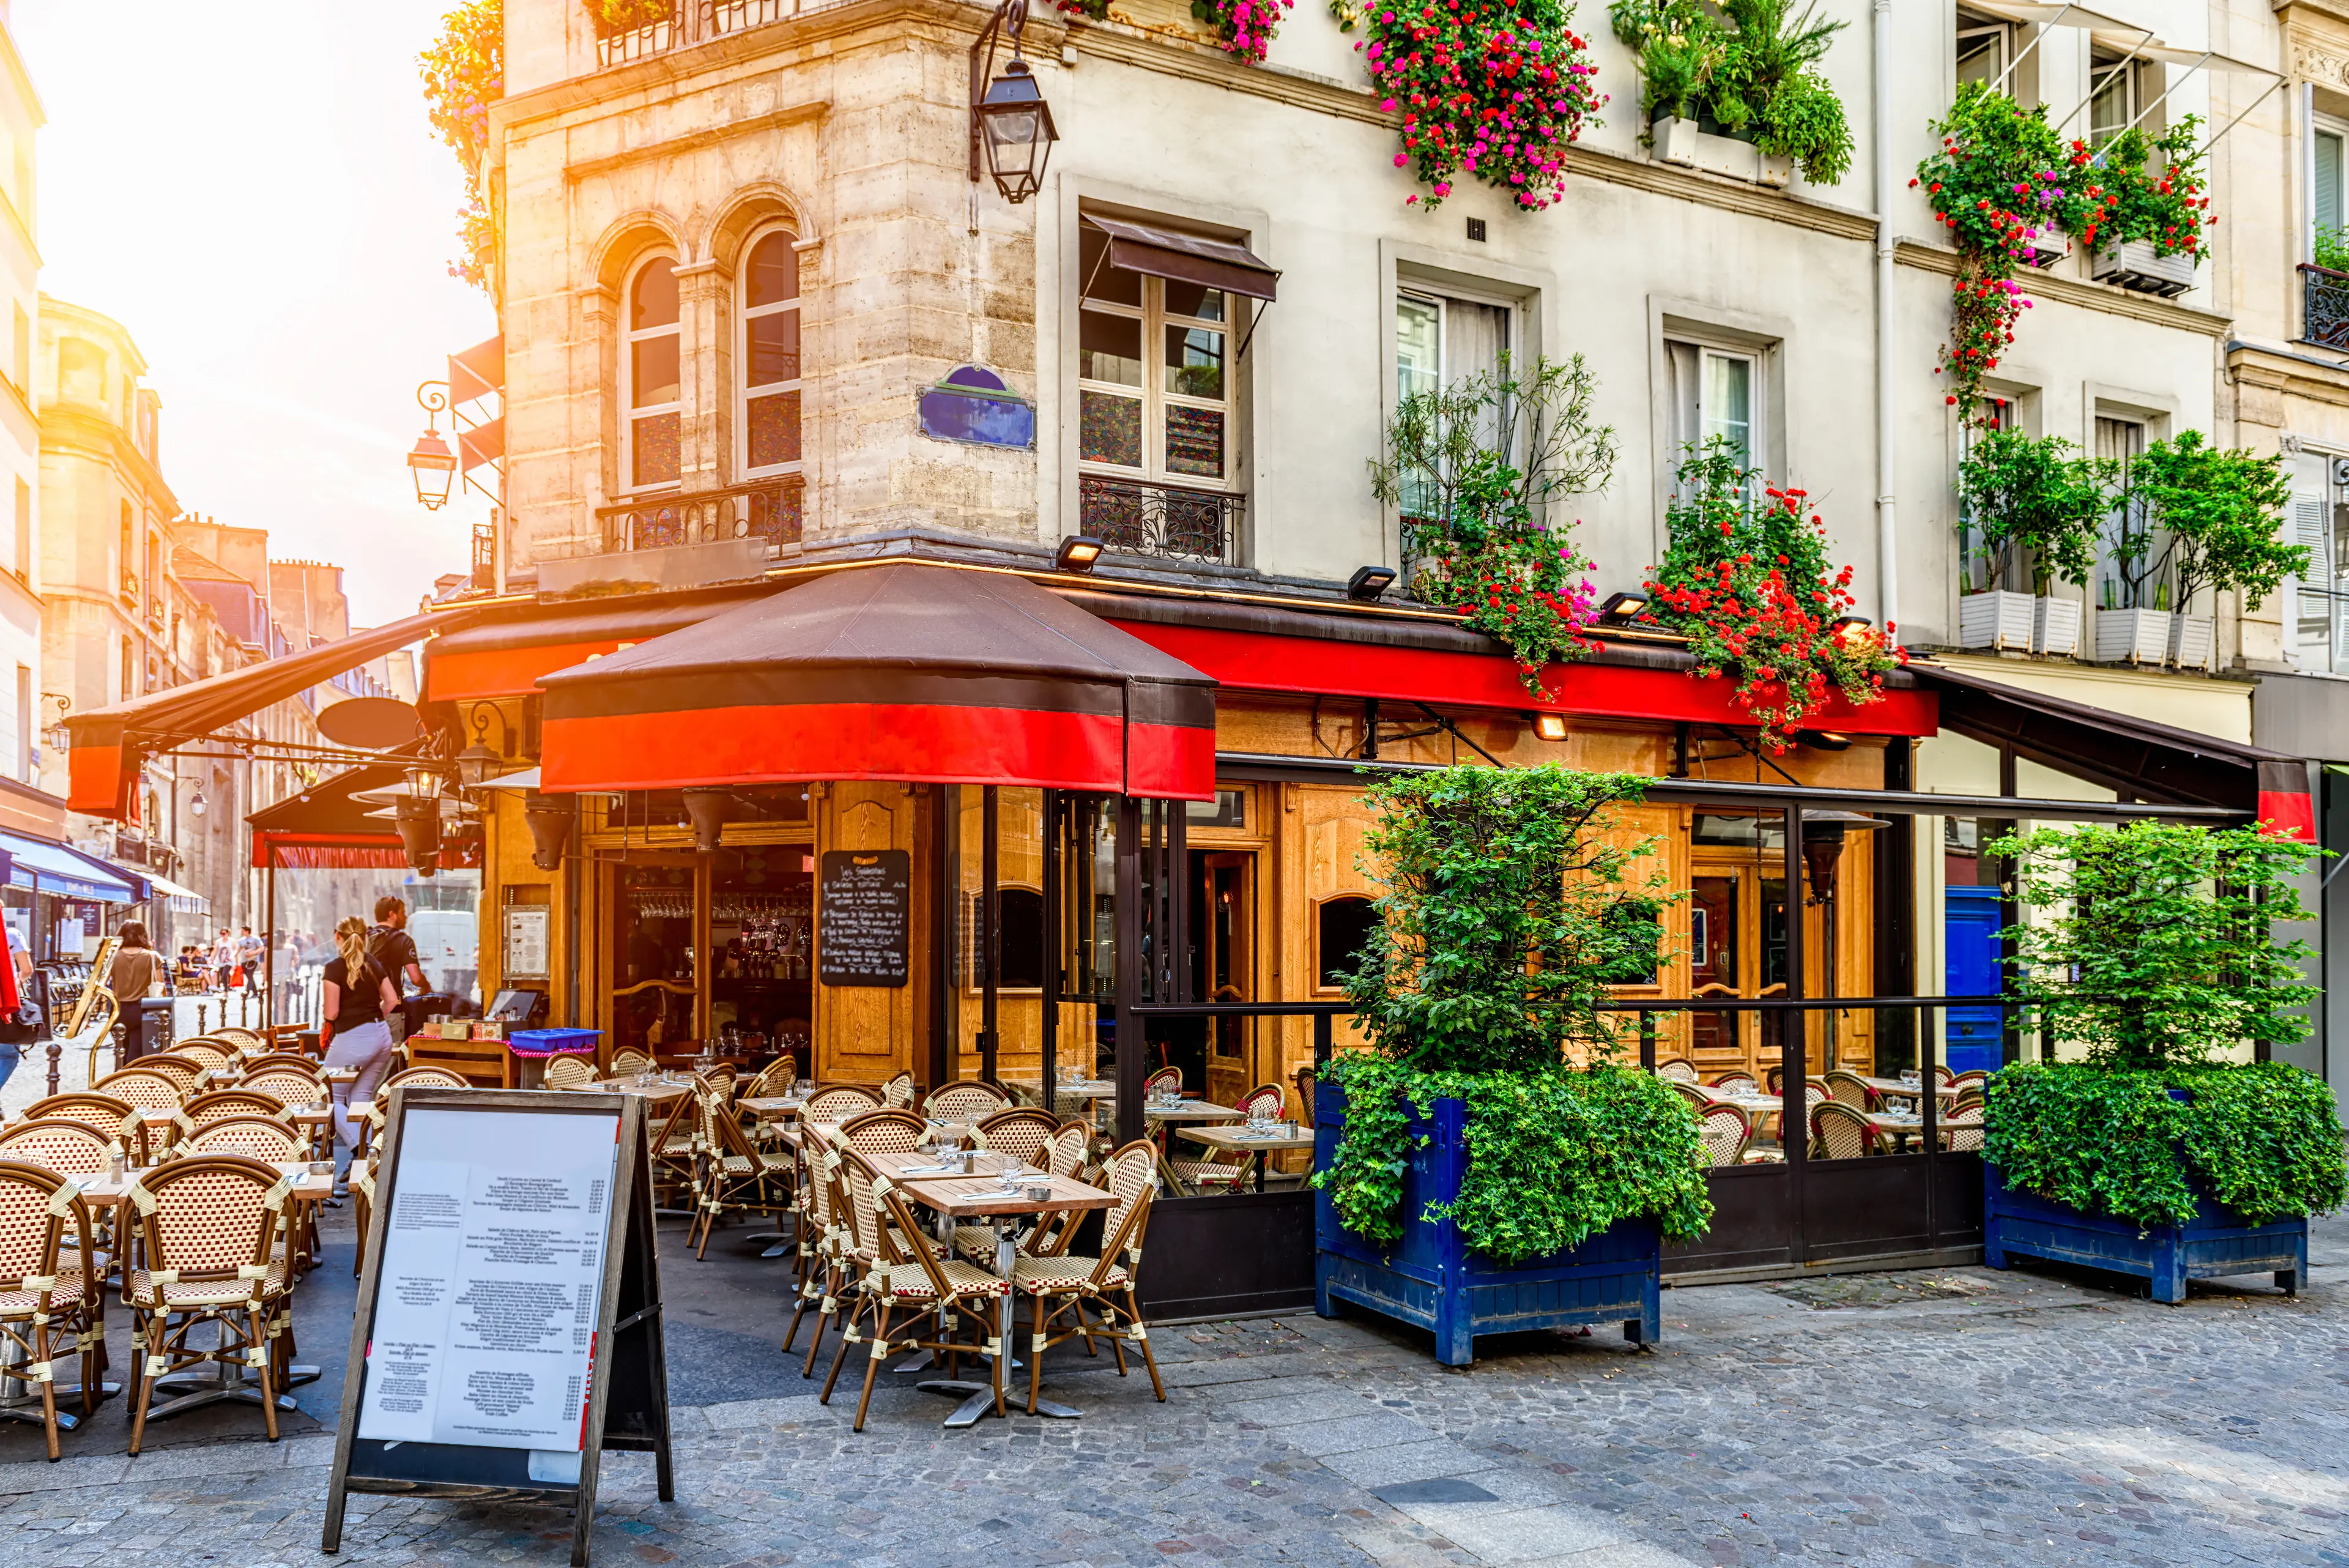 4-Day Family Gourmet and Shopping Adventure in Paris, France